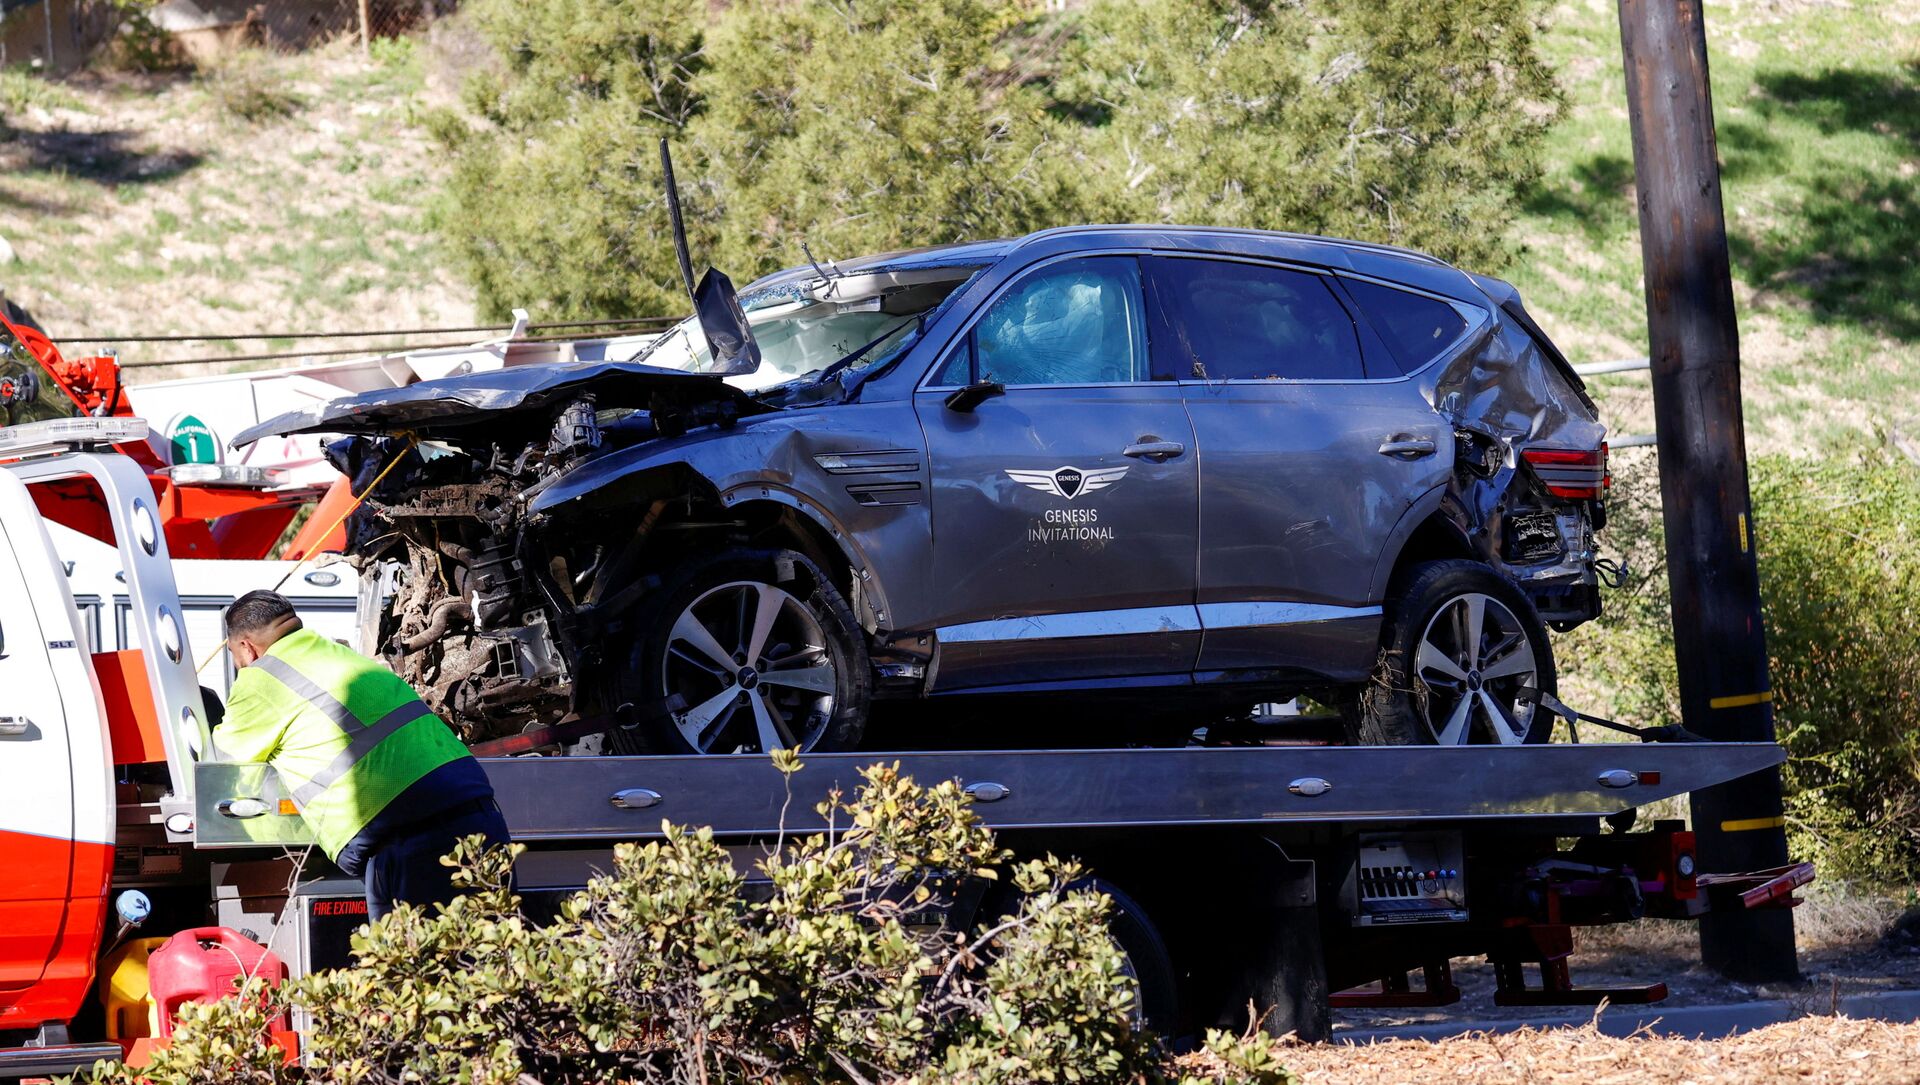 The damaged car of Tiger Woods is towed away after he was involved in a car crash, near Los Angeles, California, U.S., February 23, 2021. REUTERS/Mario Anzuoni  - Sputnik International, 1920, 25.02.2021